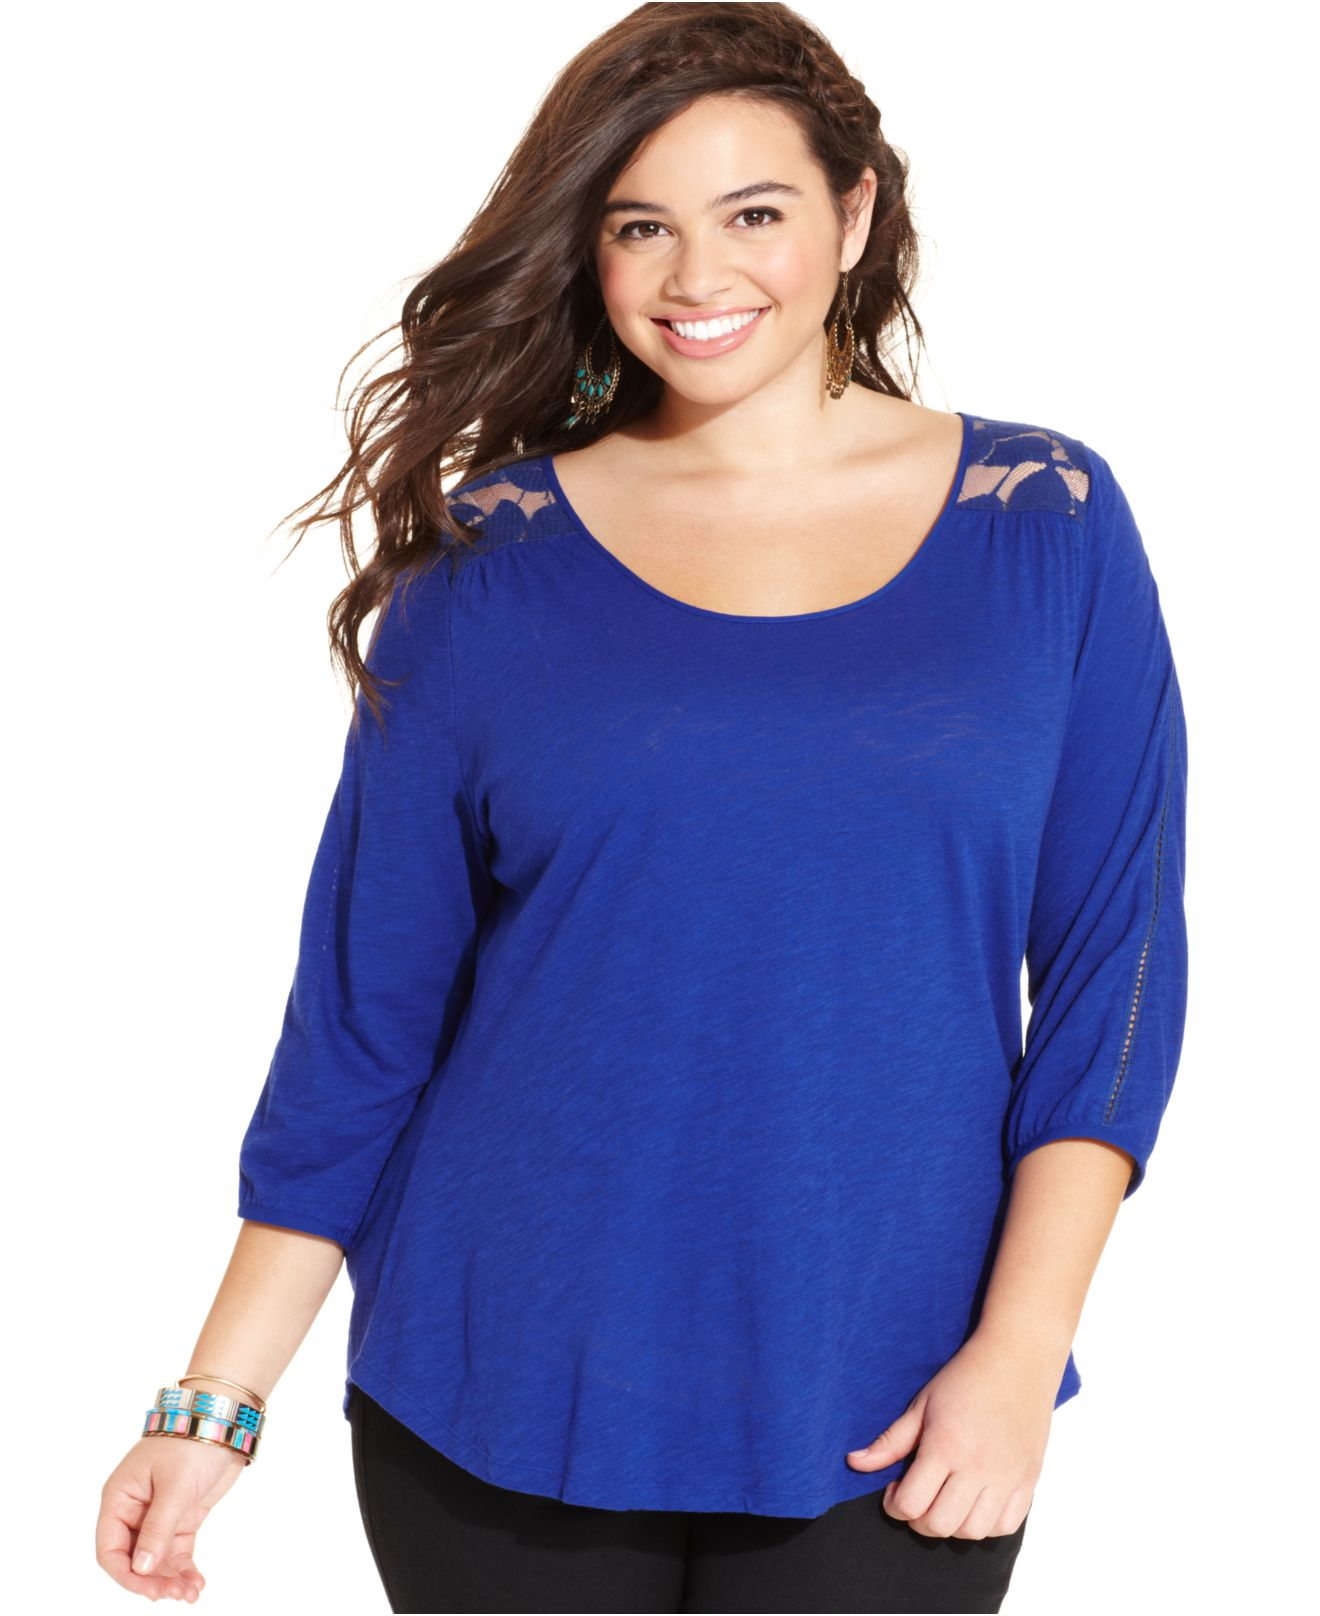 Lyst - Lucky Brand Lucky Brand Plus Size Lace-Back Top in Blue